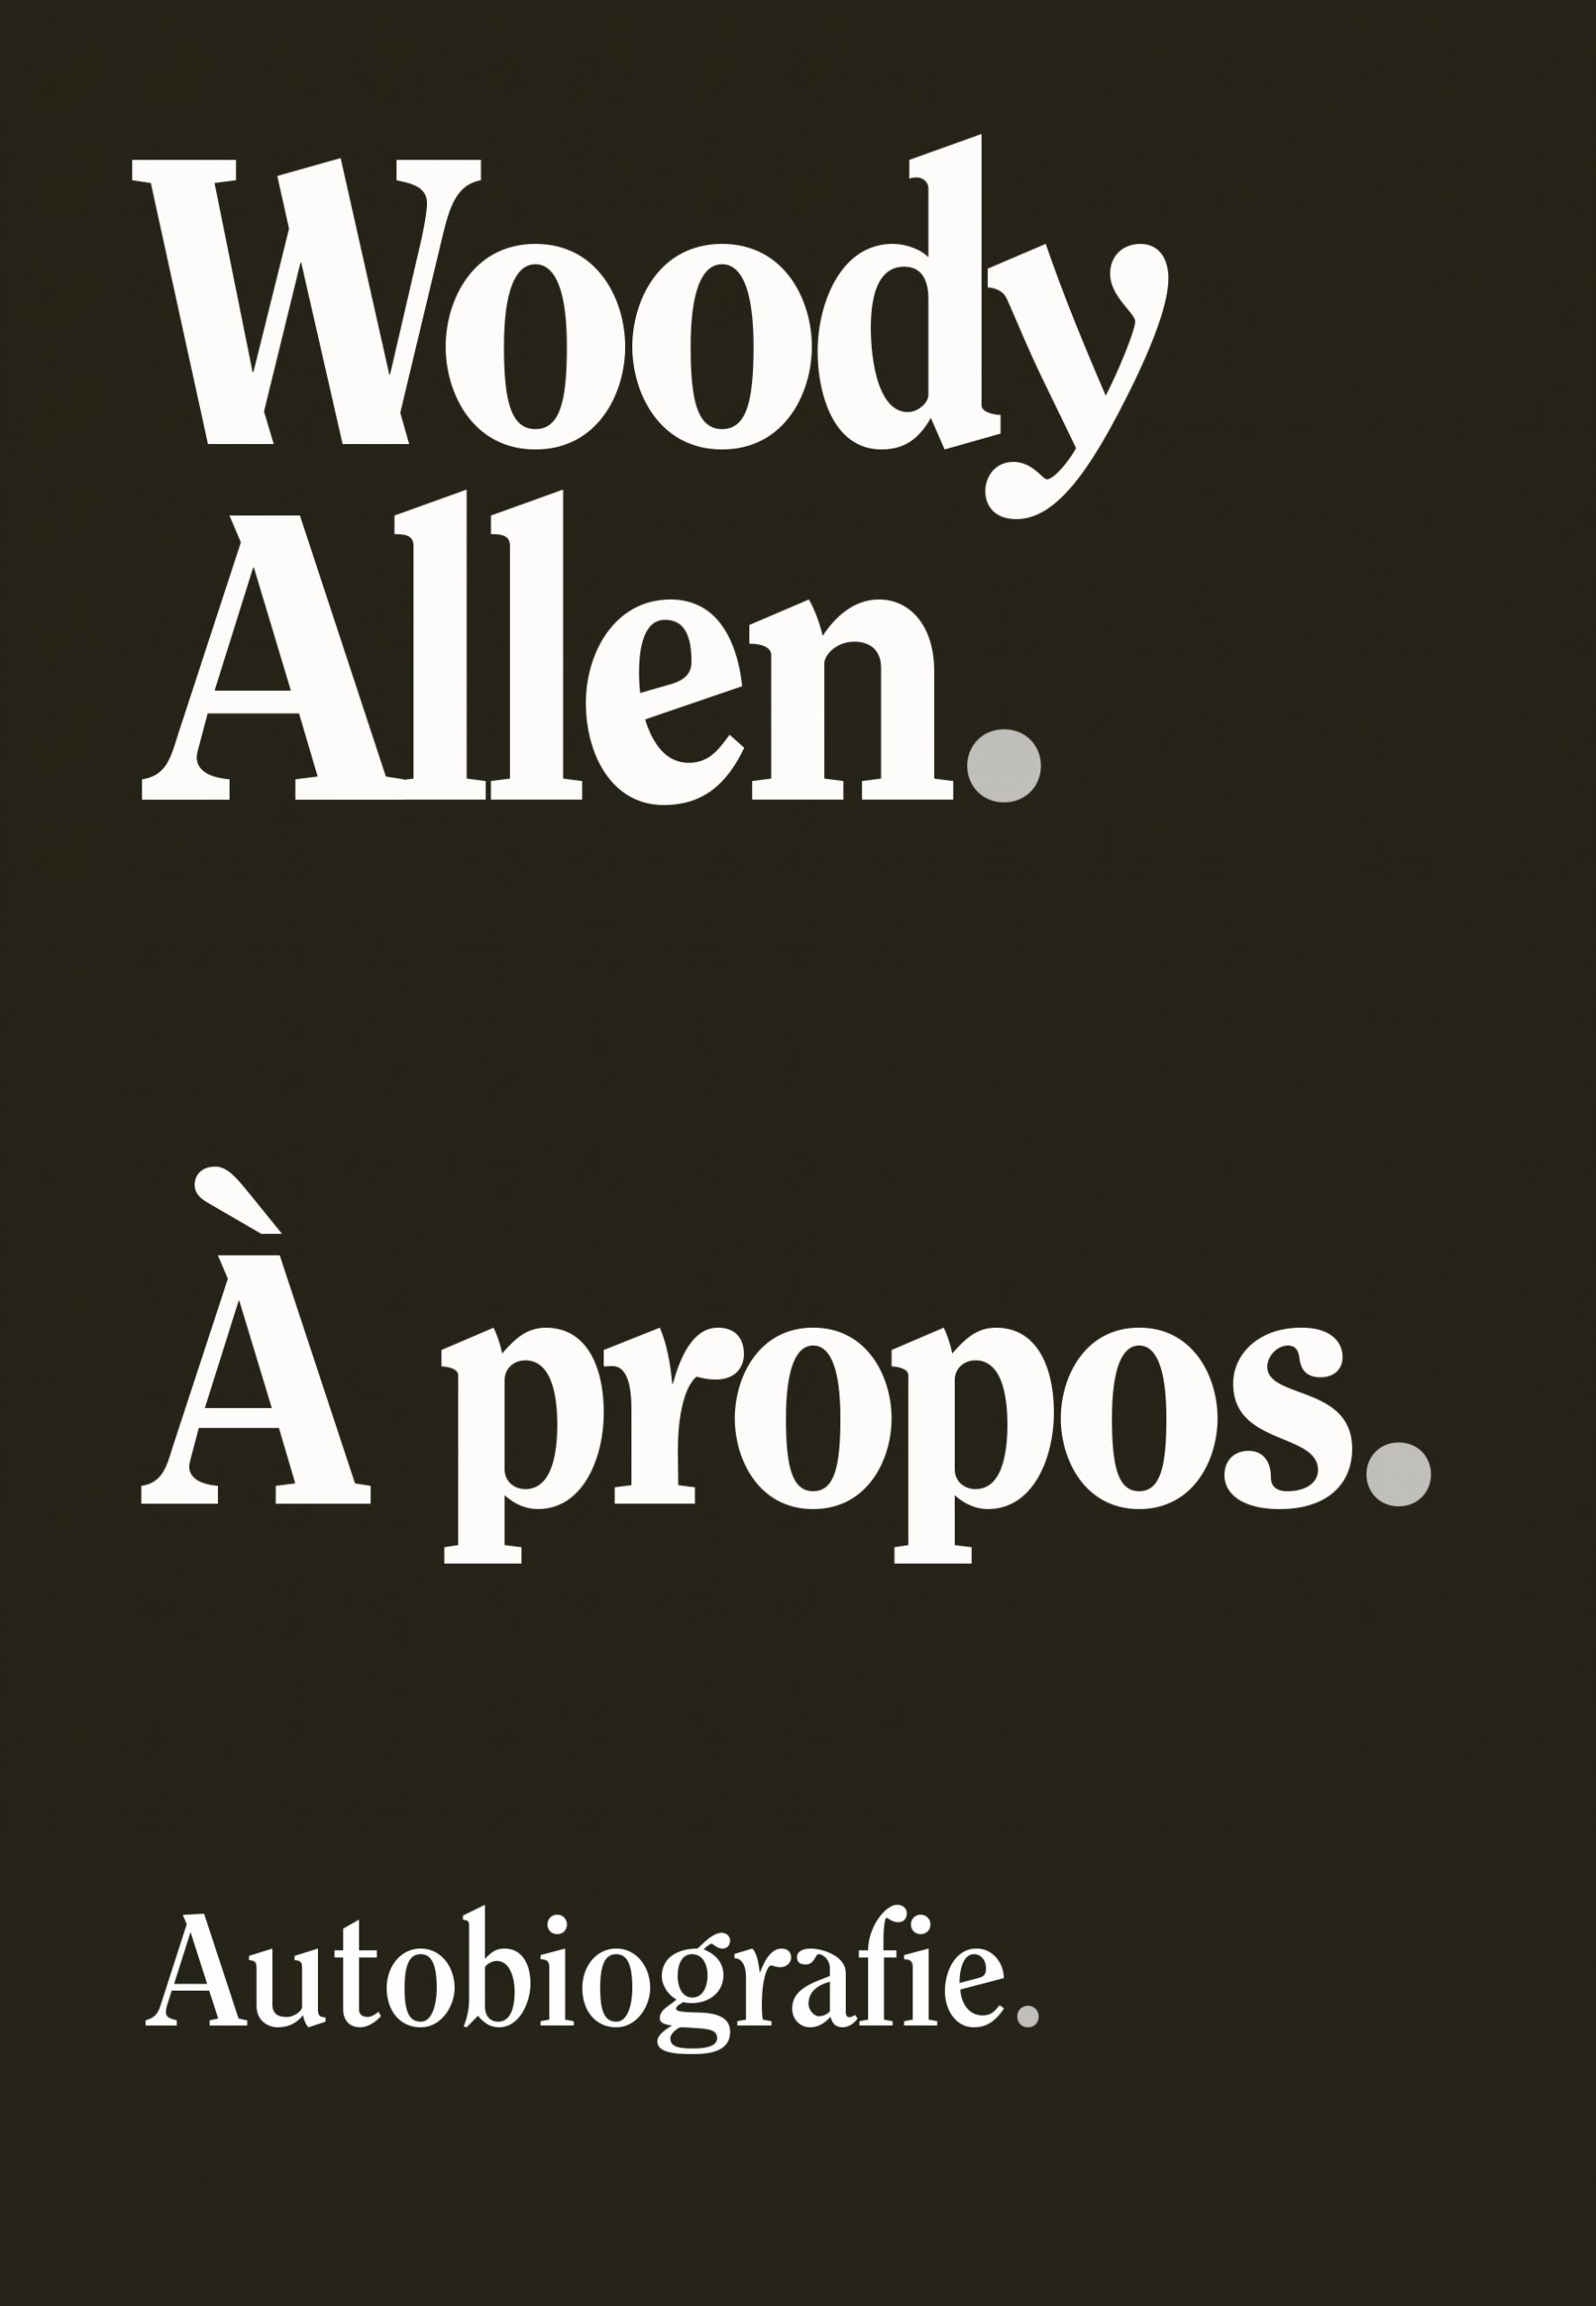 Woody Allen - A propos@1.indd